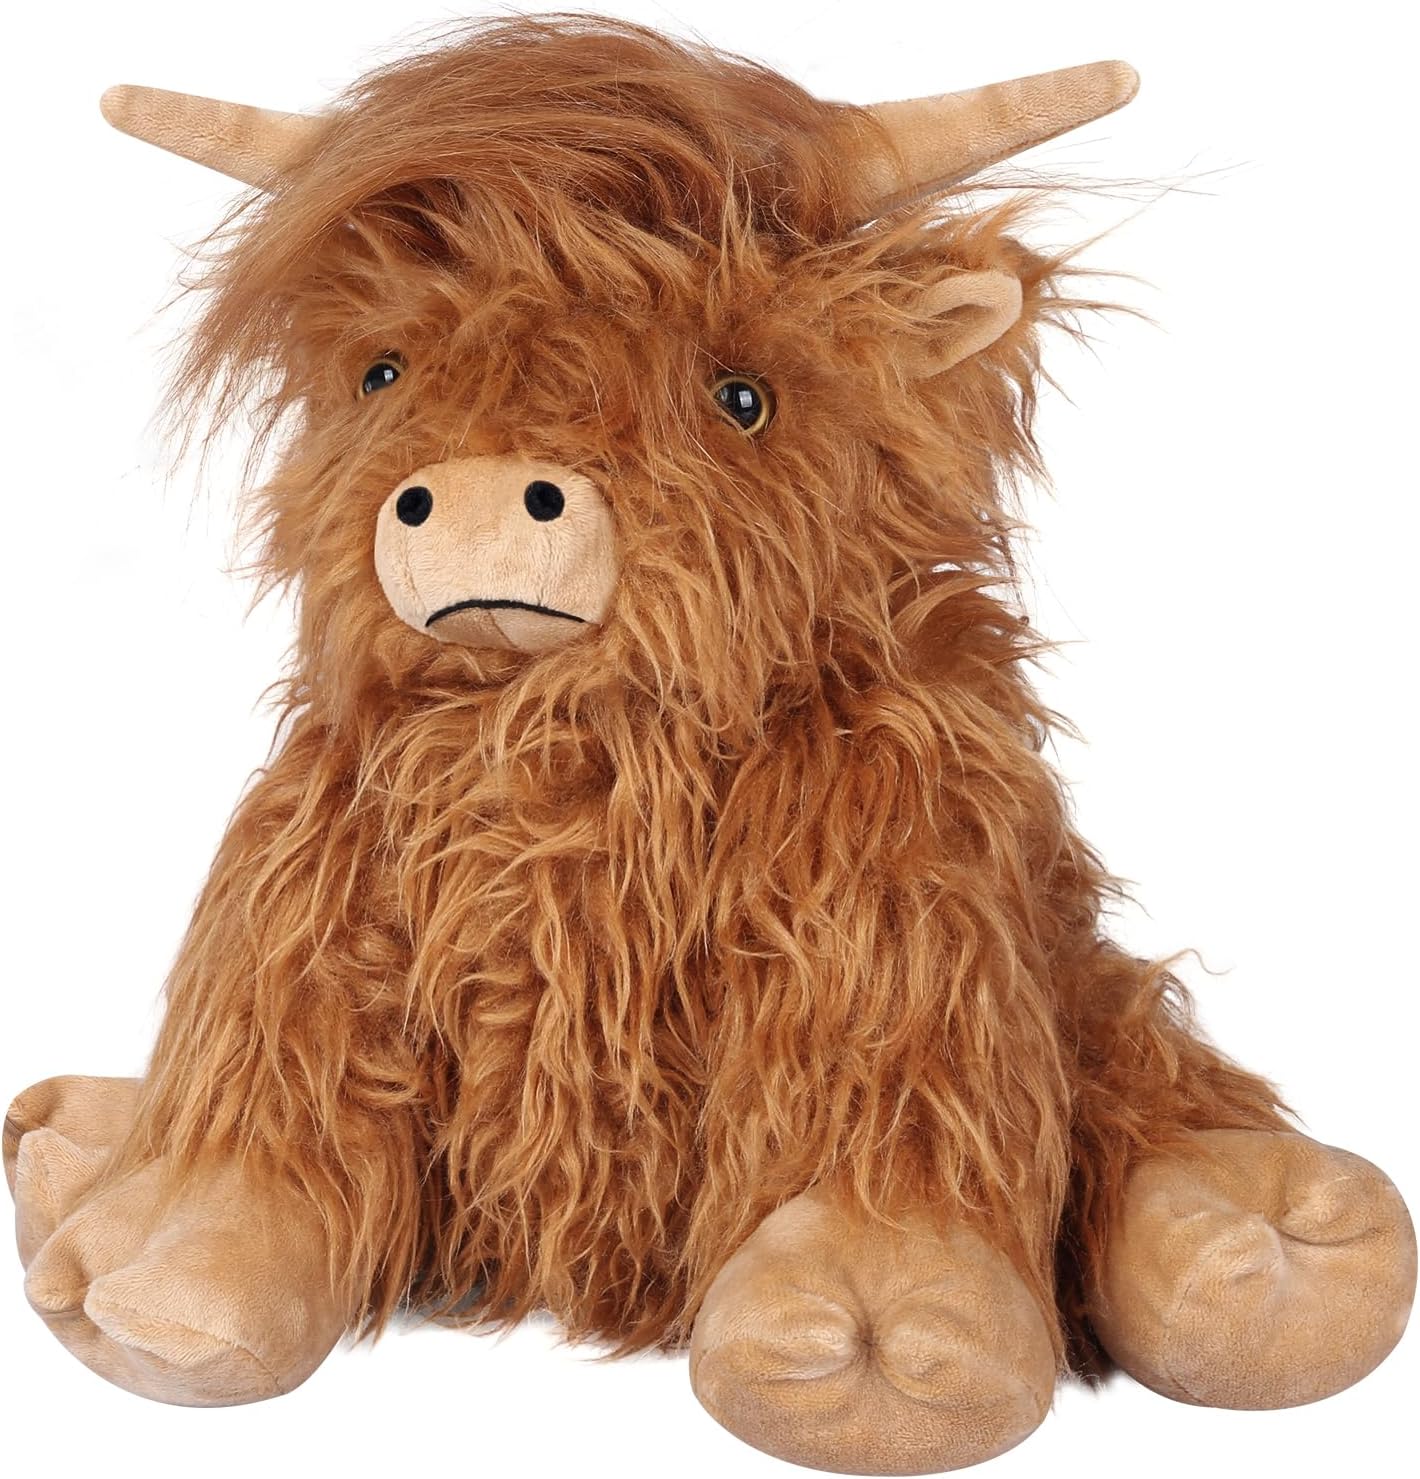 SuzziPals Highland Cow Stuffed Animals, Microwavable Stuffed Animals Heating Pad for Cramps and Pain Relief, Lavender Scented Highland Cow Plush for Stress Relief, Cute Stuffed Cow Gifts Plush Toys